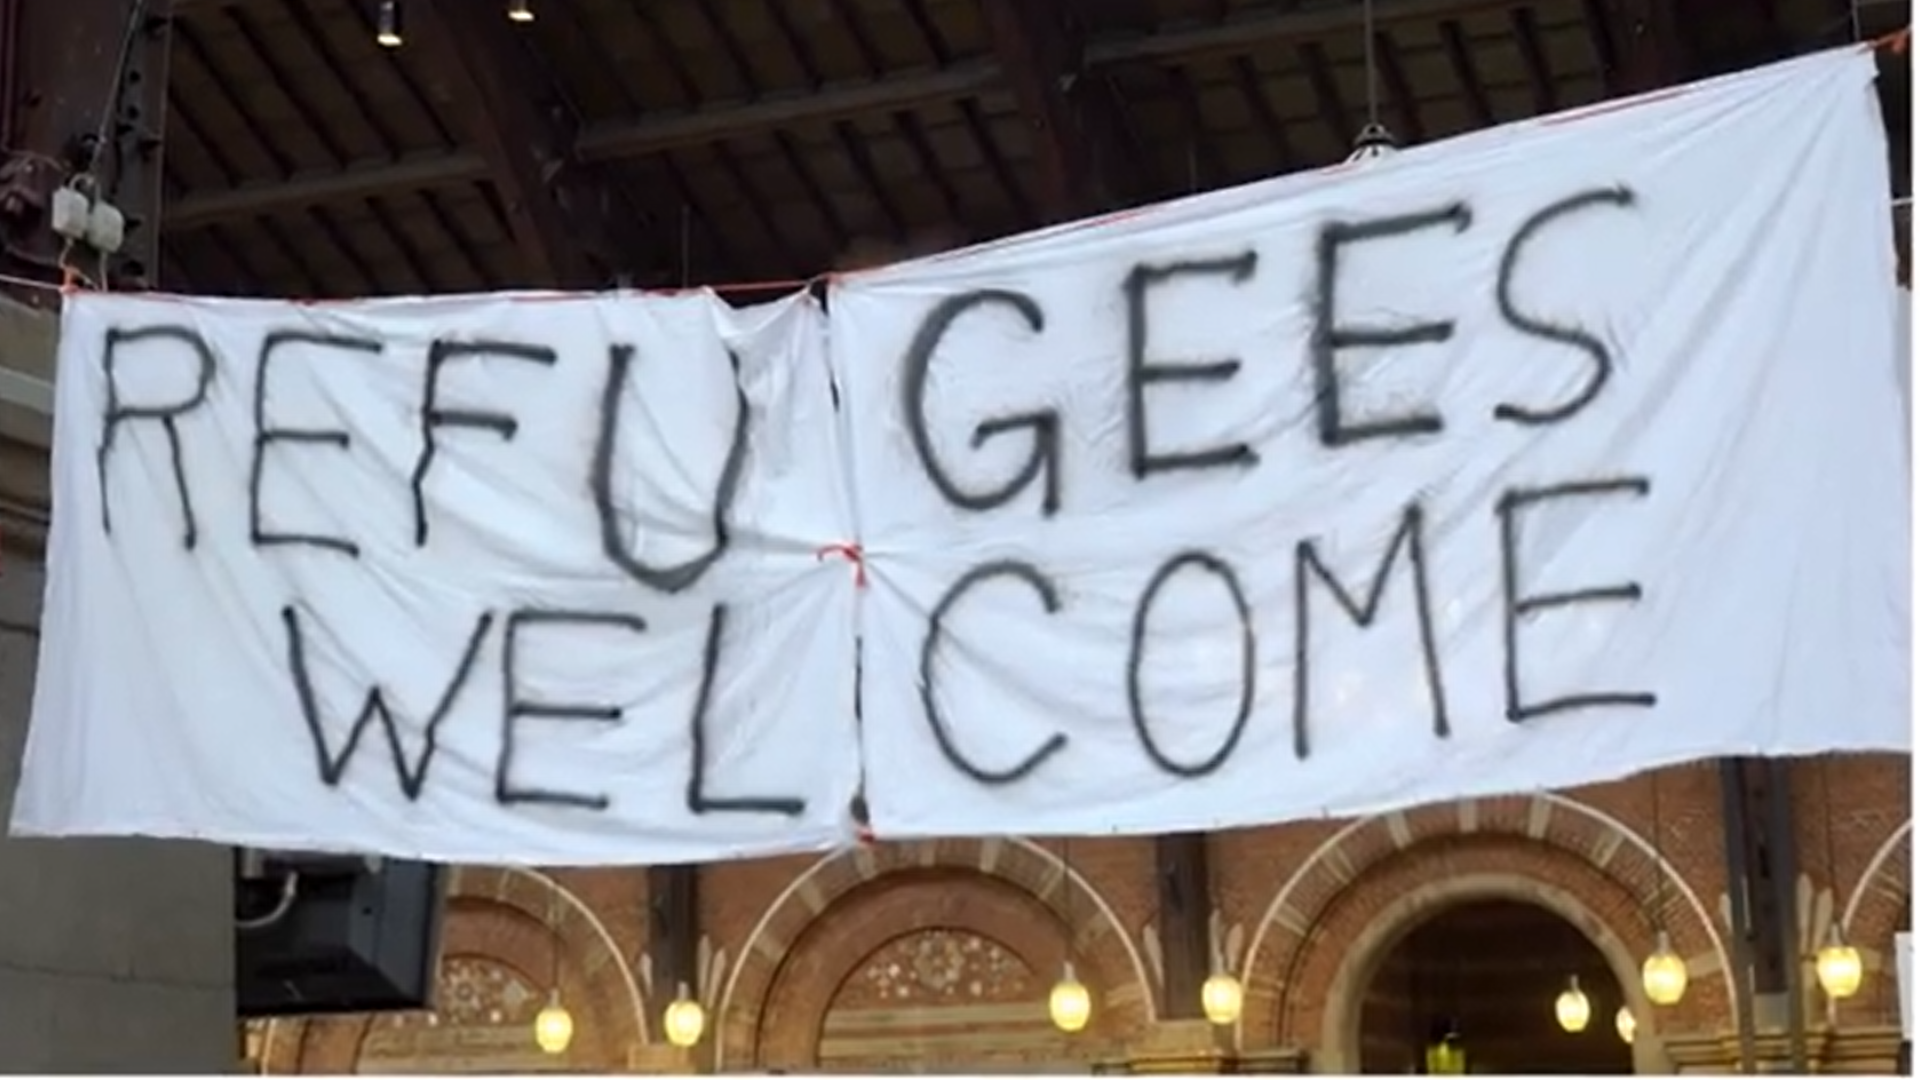 Refugees Welcome Banner